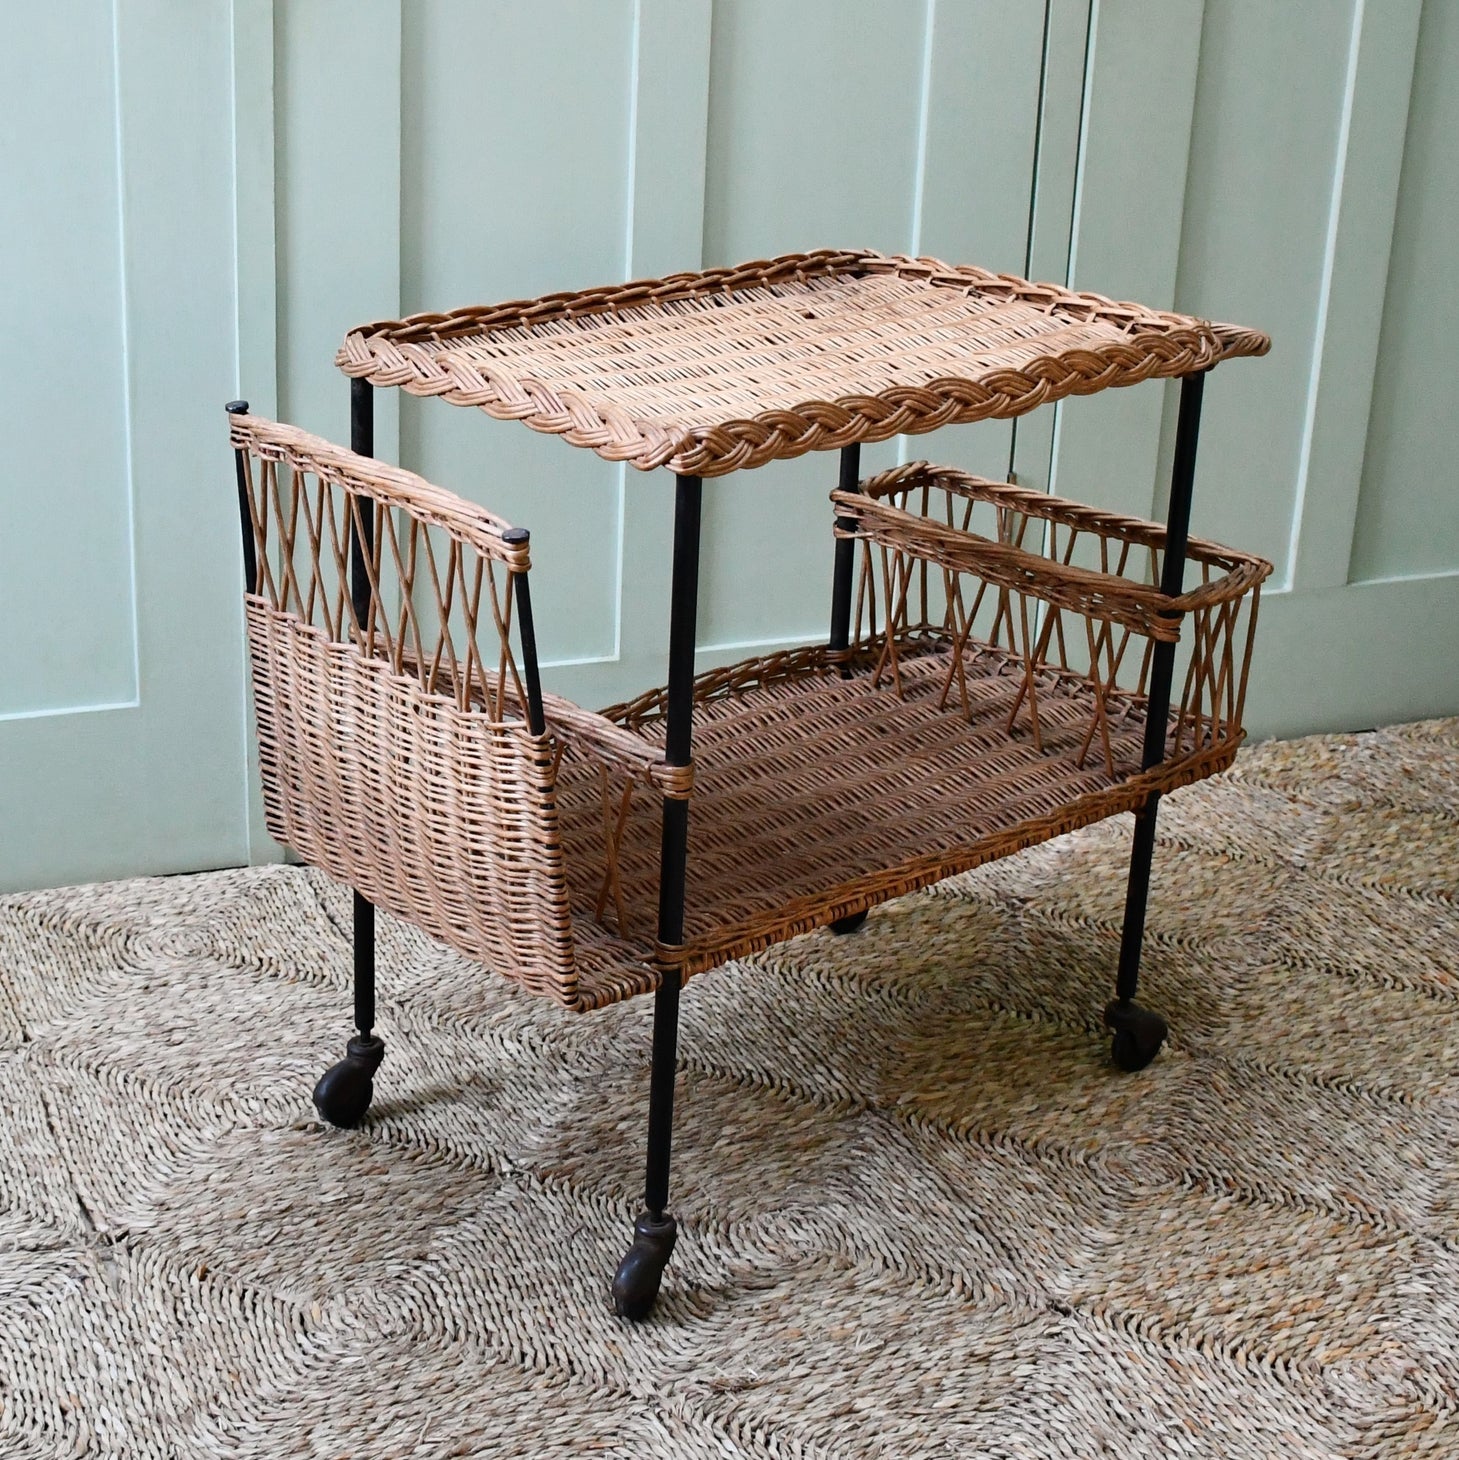 Raoul Guys - French Drinks Trolley